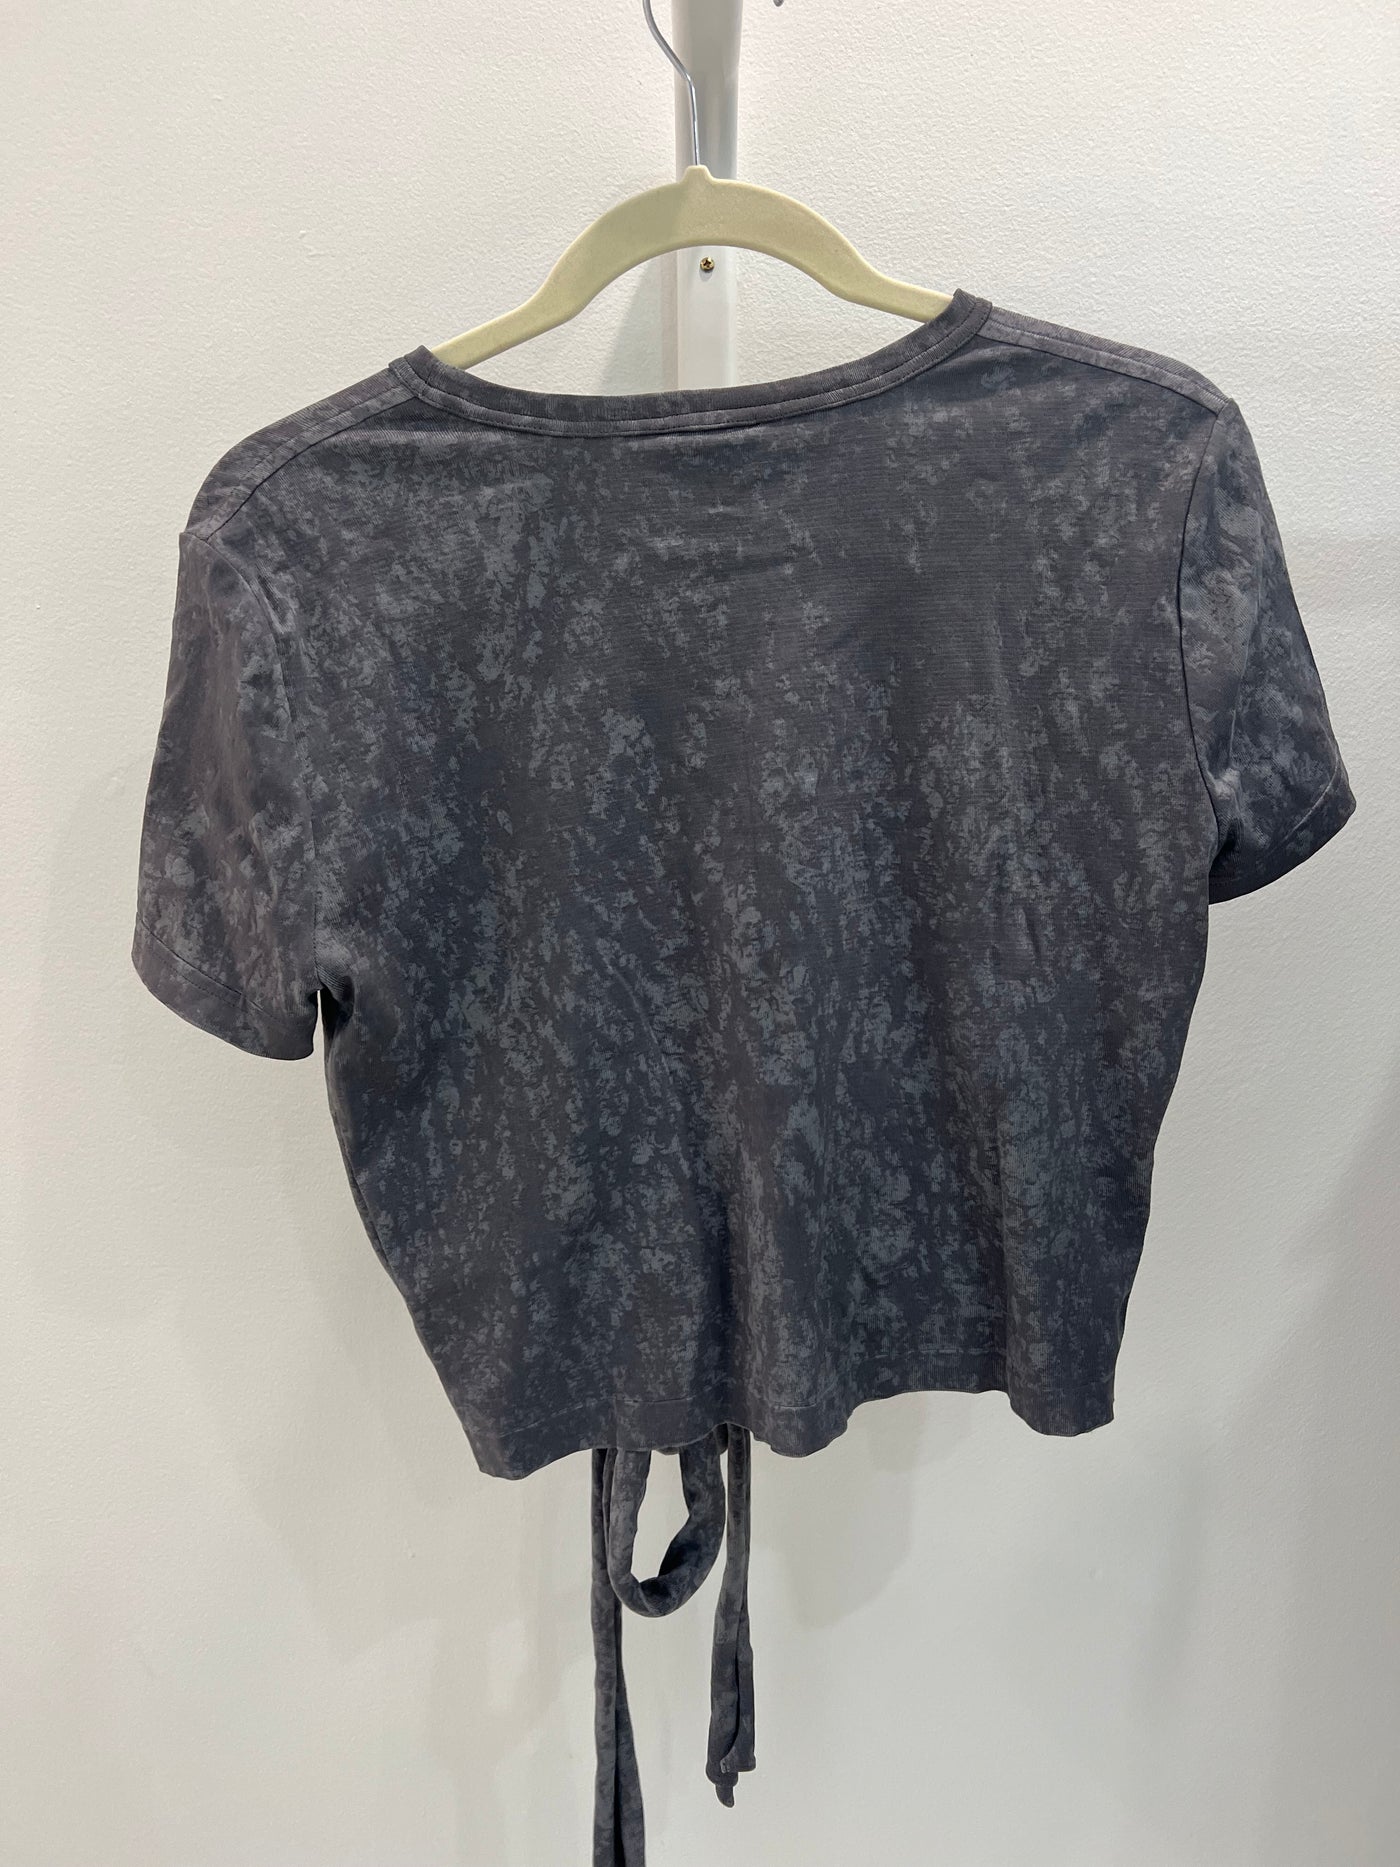 Chanel Grey T-Shirt - Size 38/40 - SOLD